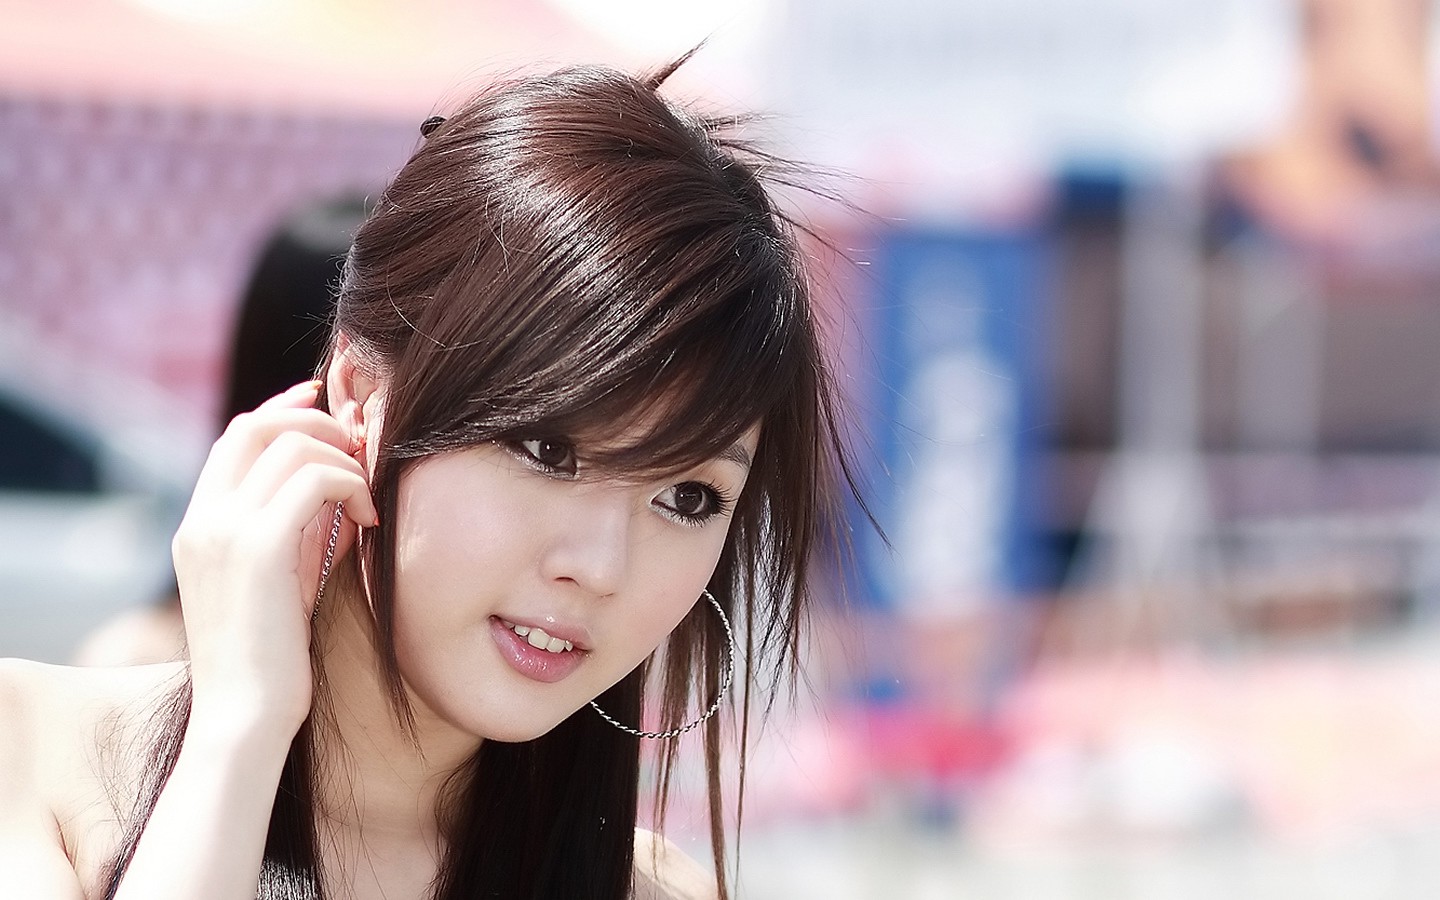 Asian, Women Wallpapers HD / Desktop and Mobile Backgrounds